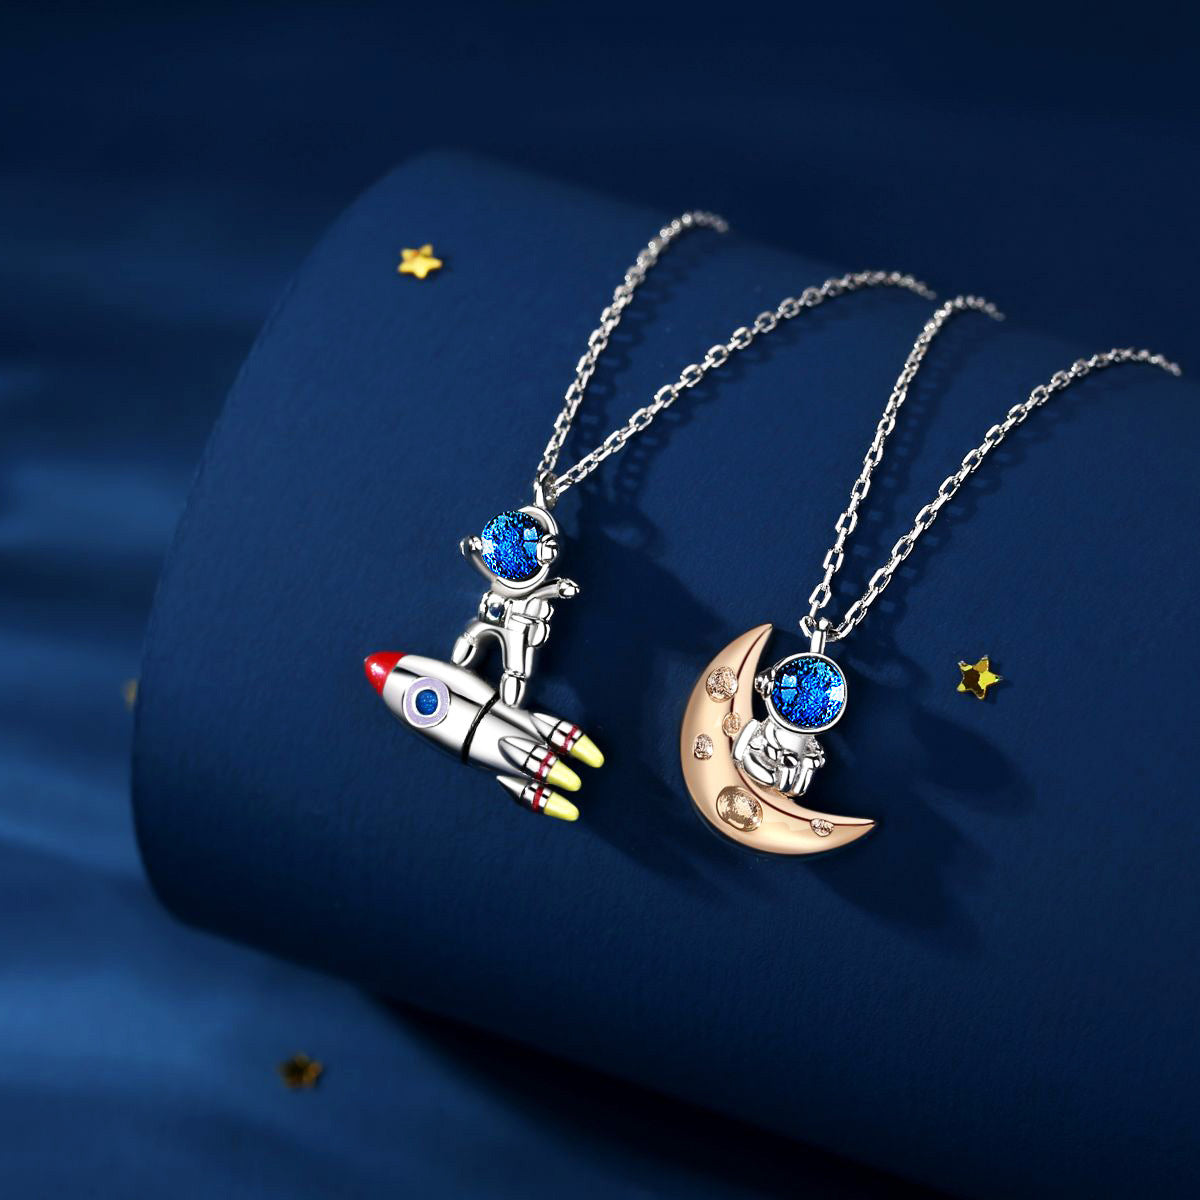 Innocence 925 Silver Plated Mutual Attraction Couples Matching Necklaces  Spaceman Pendants 2 PCS Promise Astronaut Birthday Valentine's Day Gift